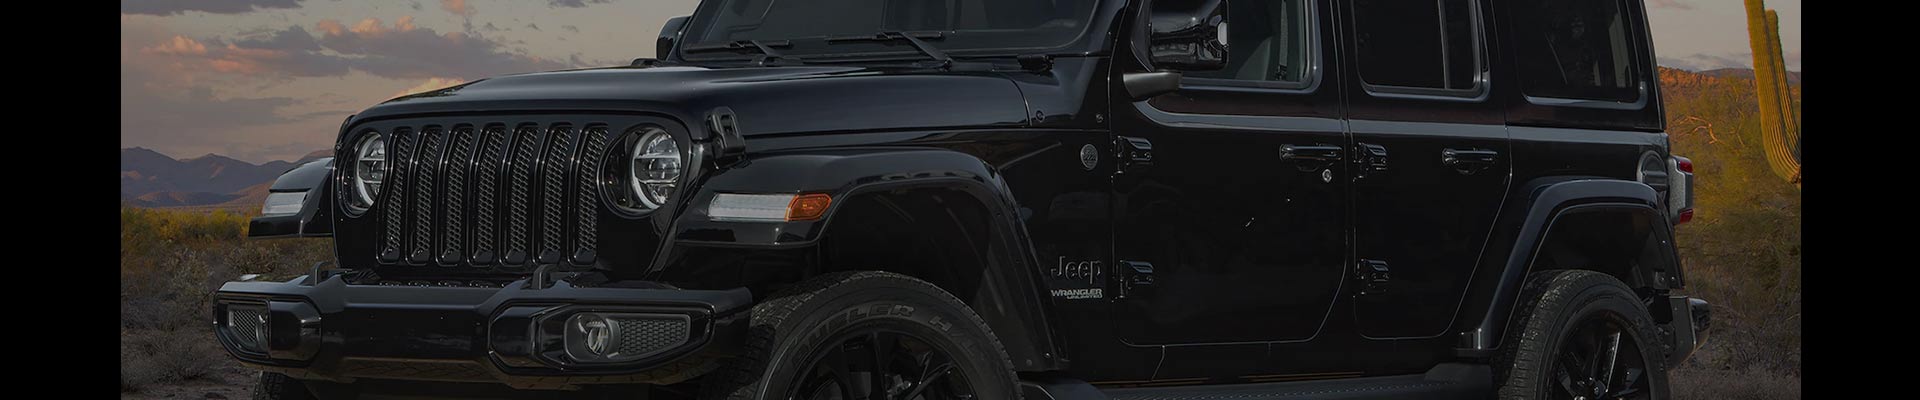 Shop Replacement and OEM Jeep Wrangler Parts with Discounted Price on the Net